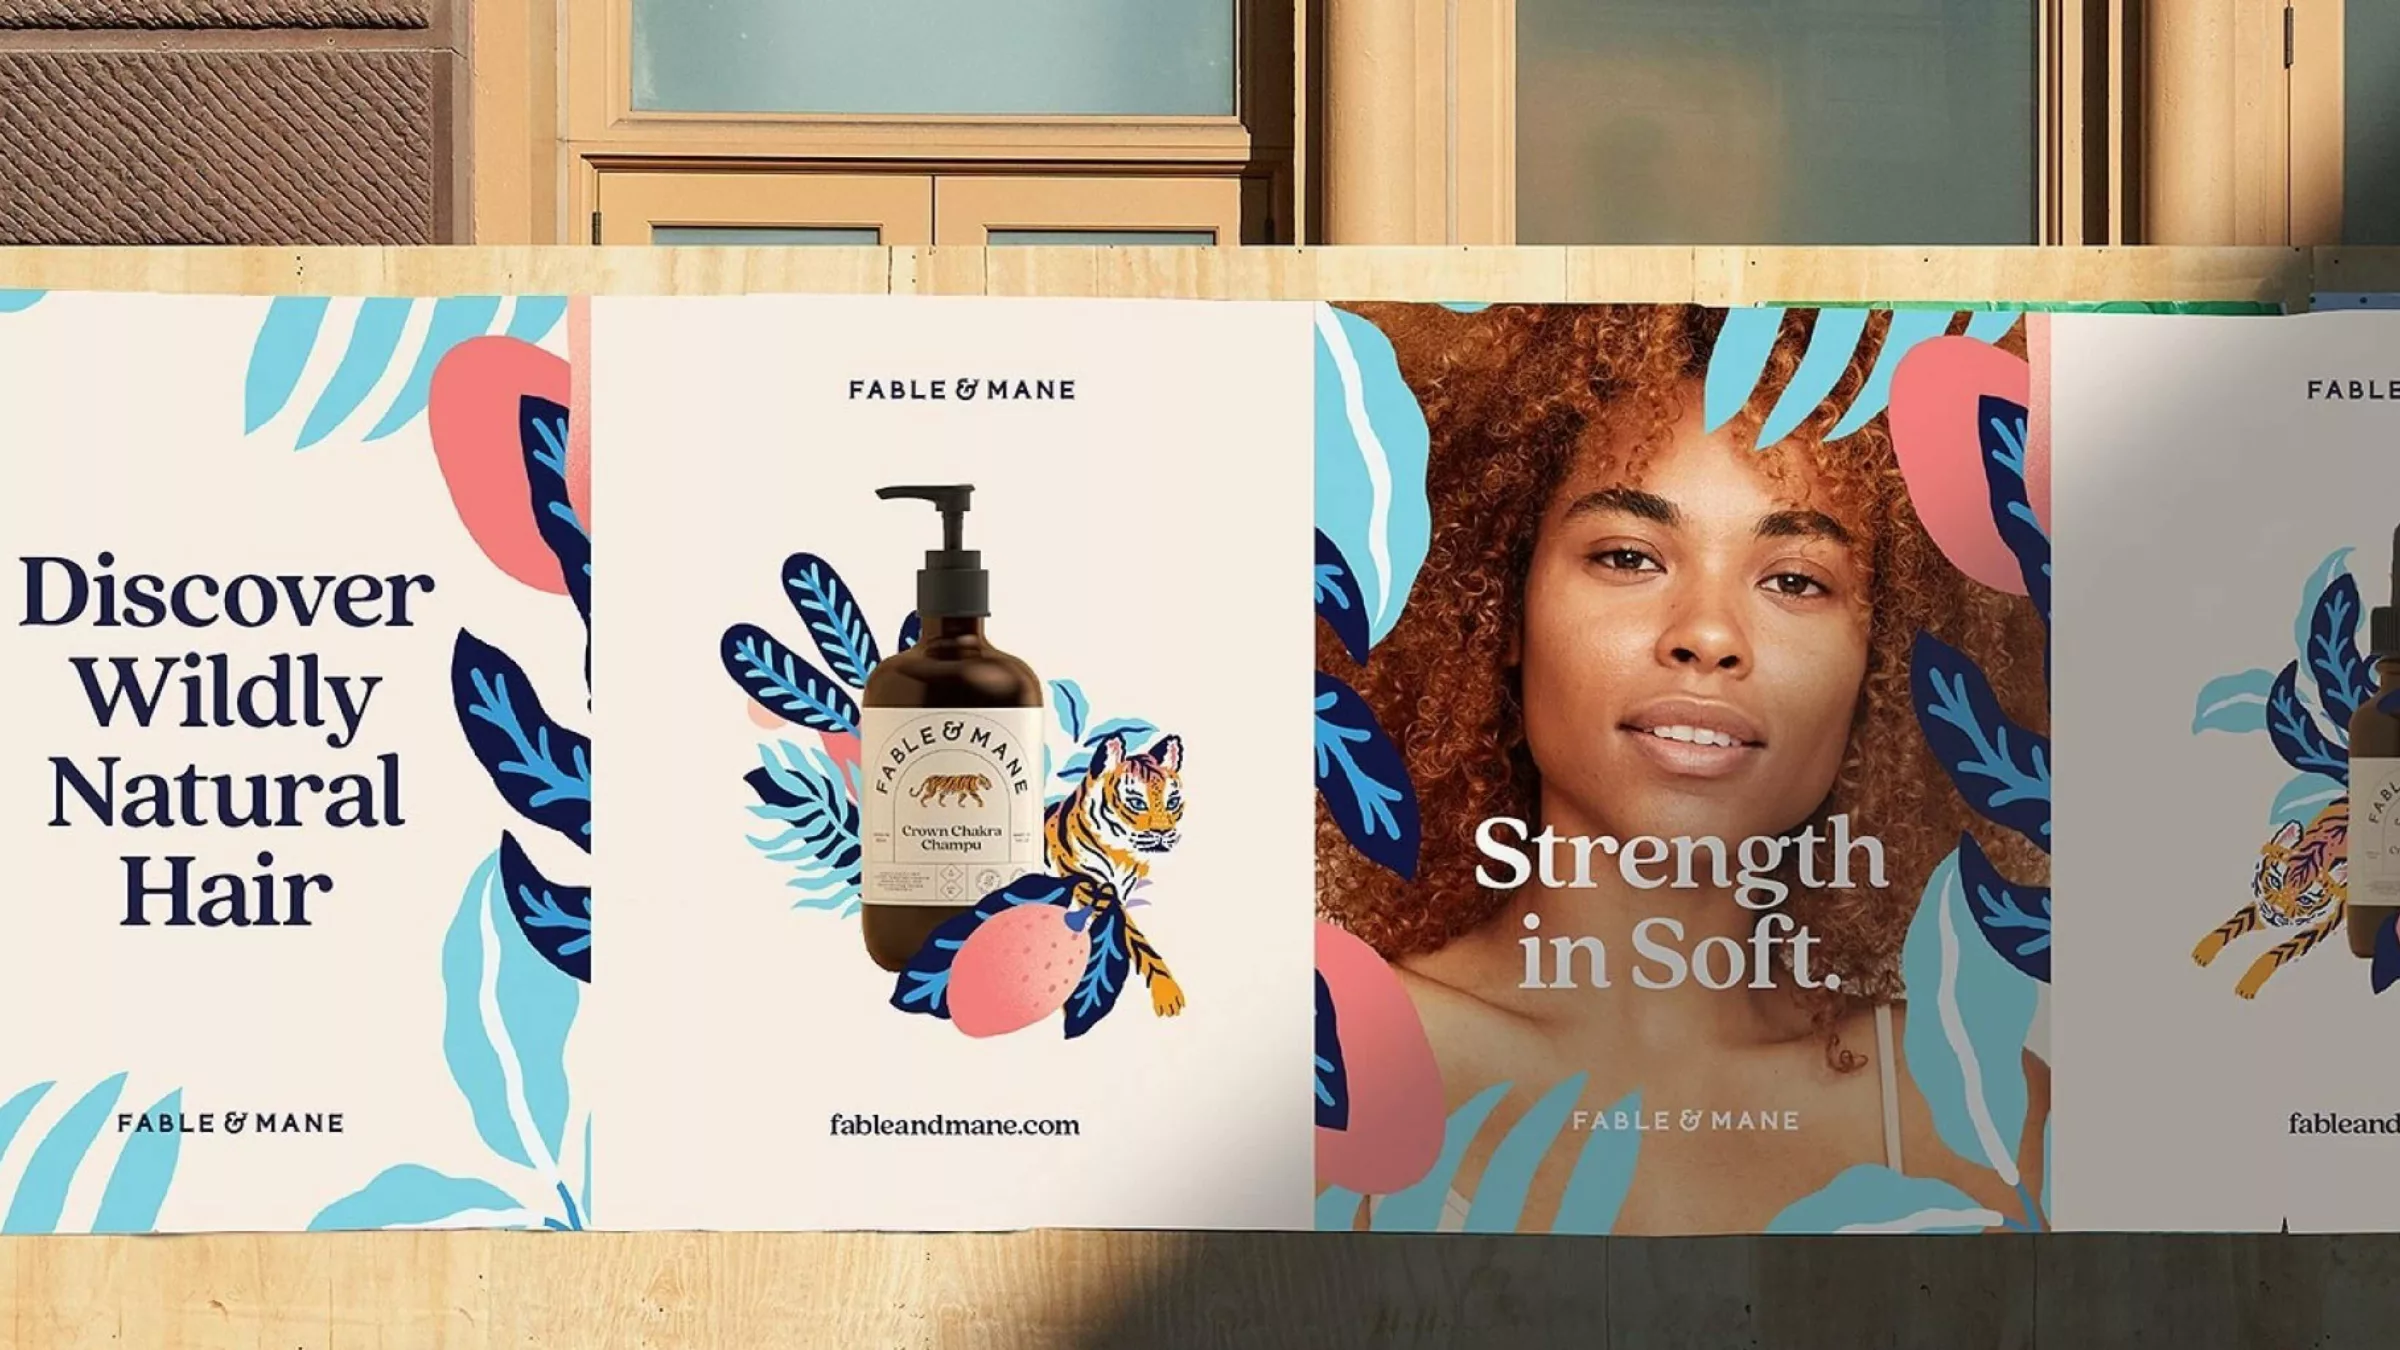 Advertisements for a natural hair care product, highlighting the benefits of using chemical-free formulas